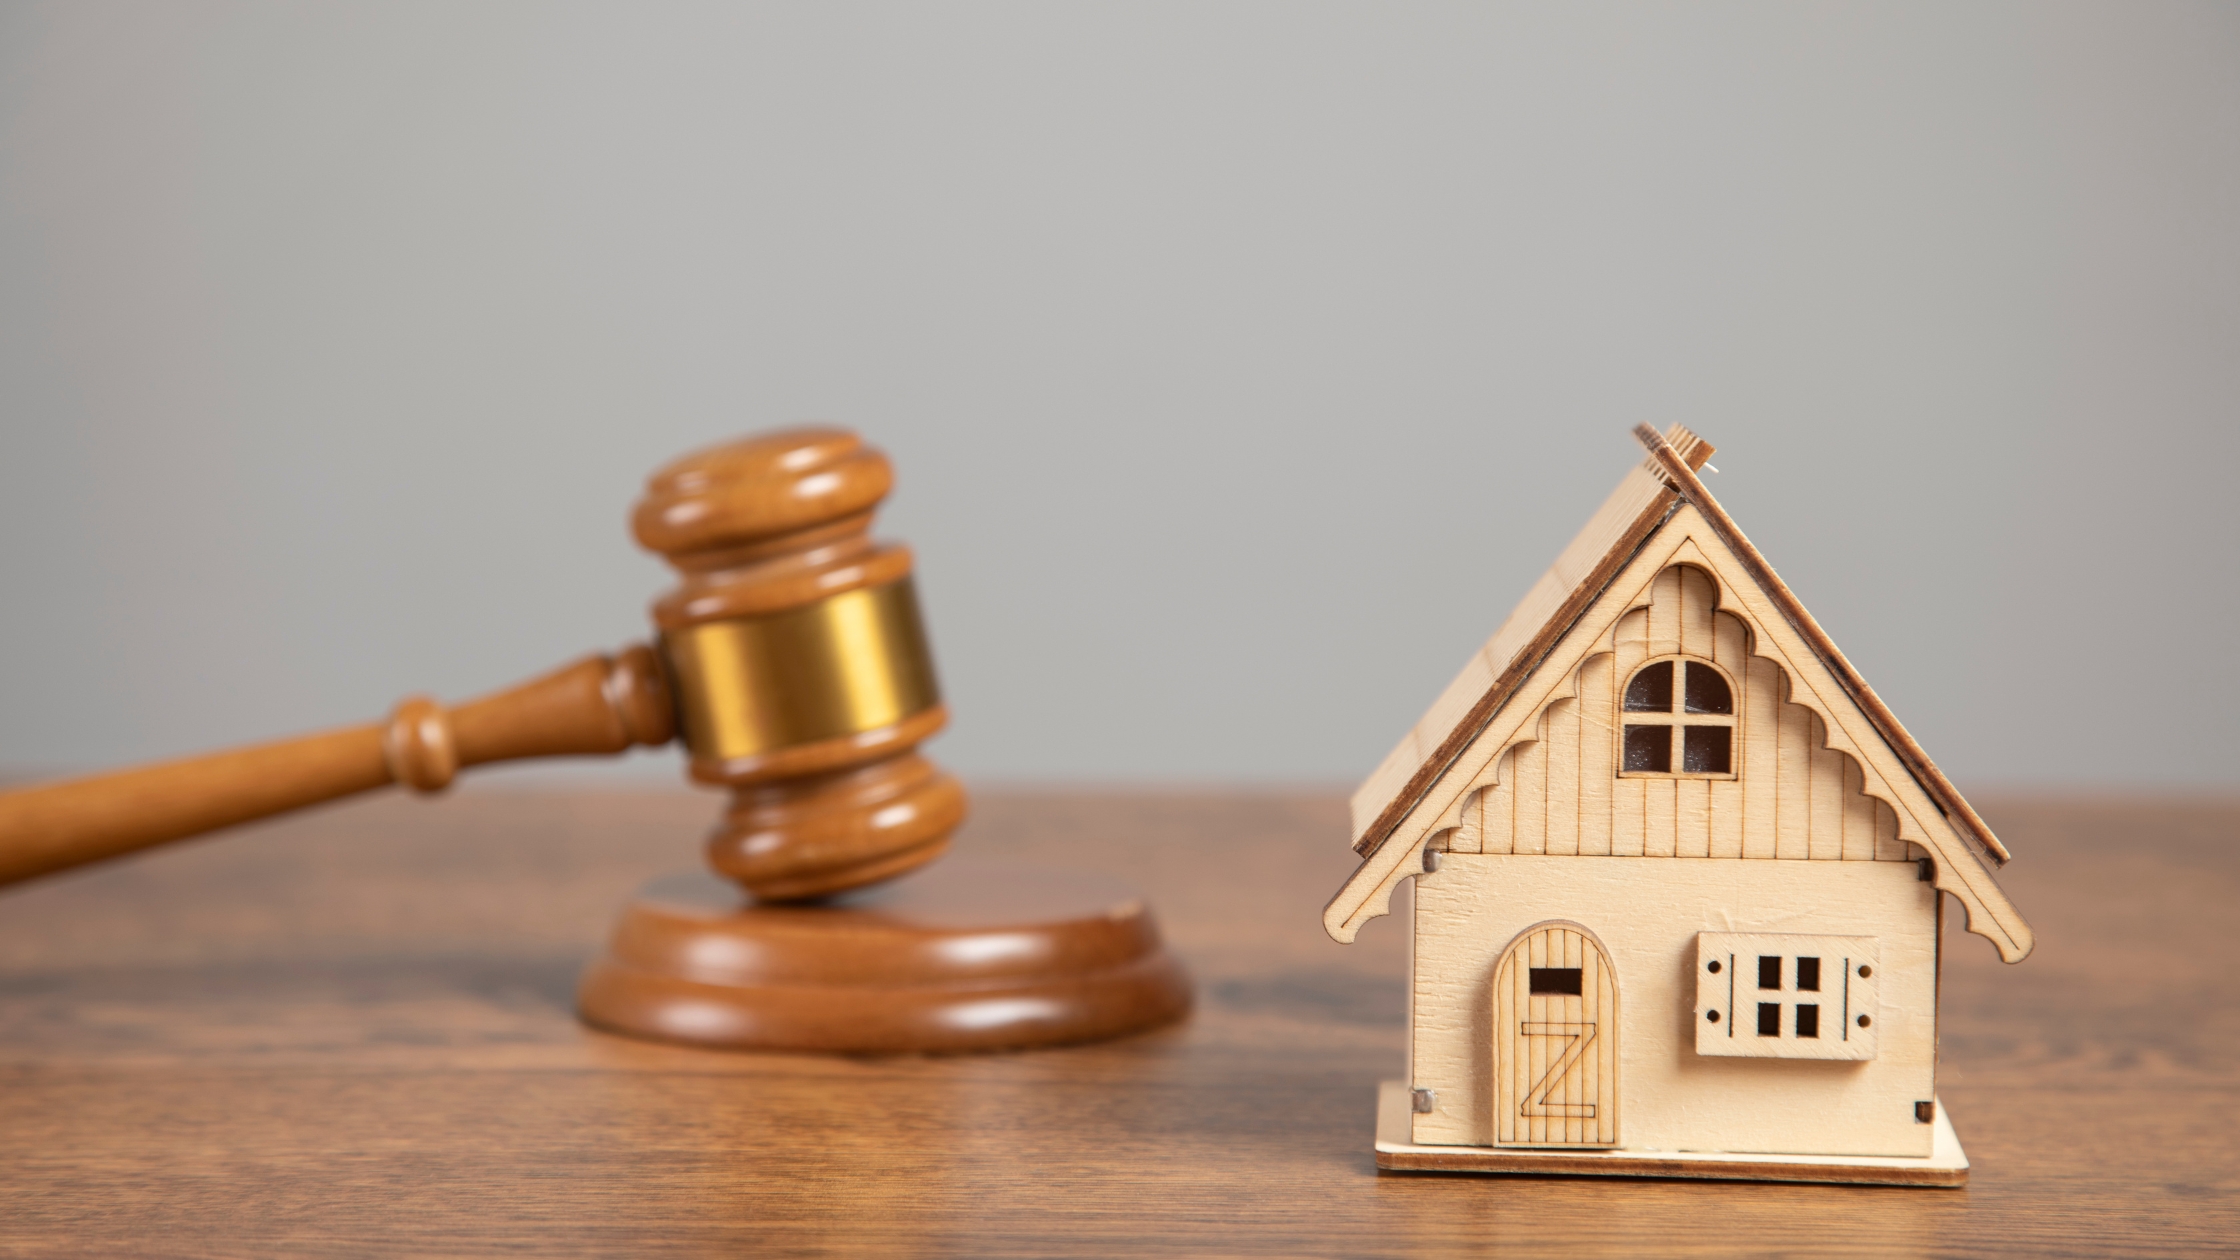 what does a real estate lawyer do